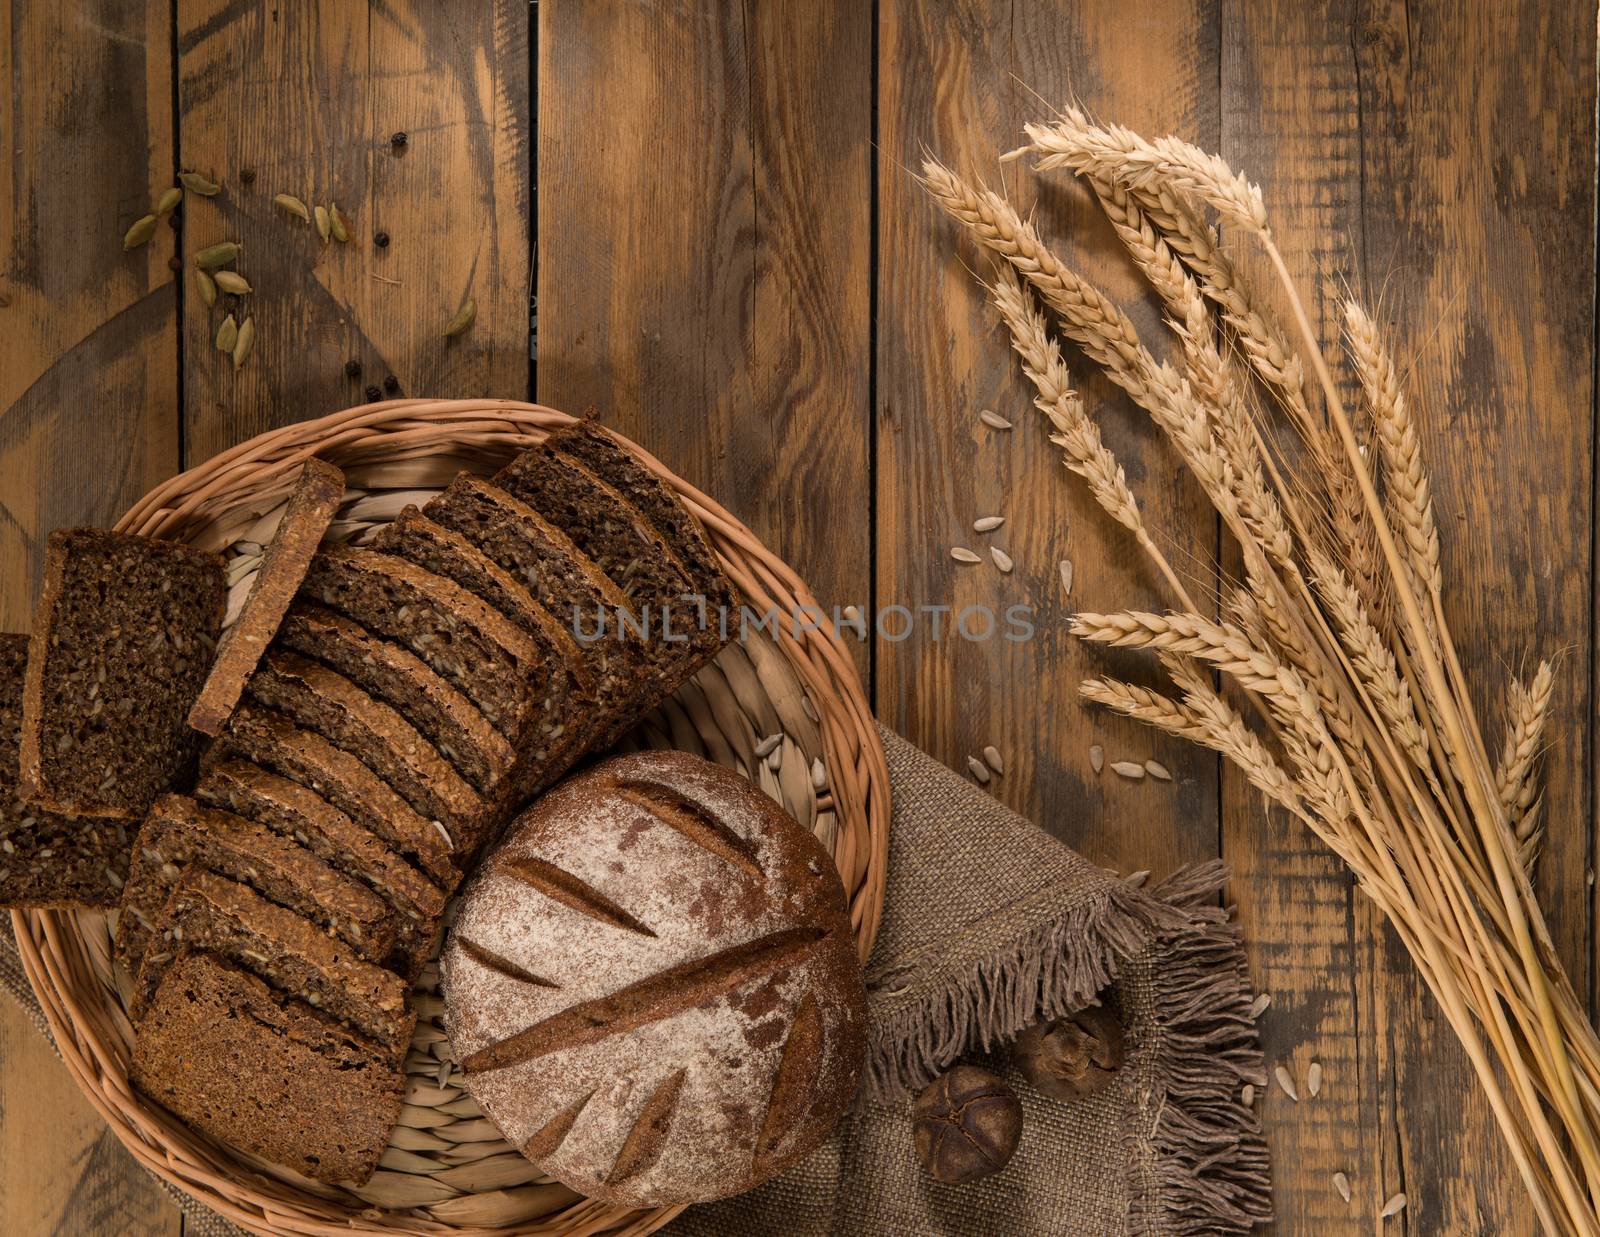 Sliced bread in a wicker tray with spikelets wooden surface with cloth